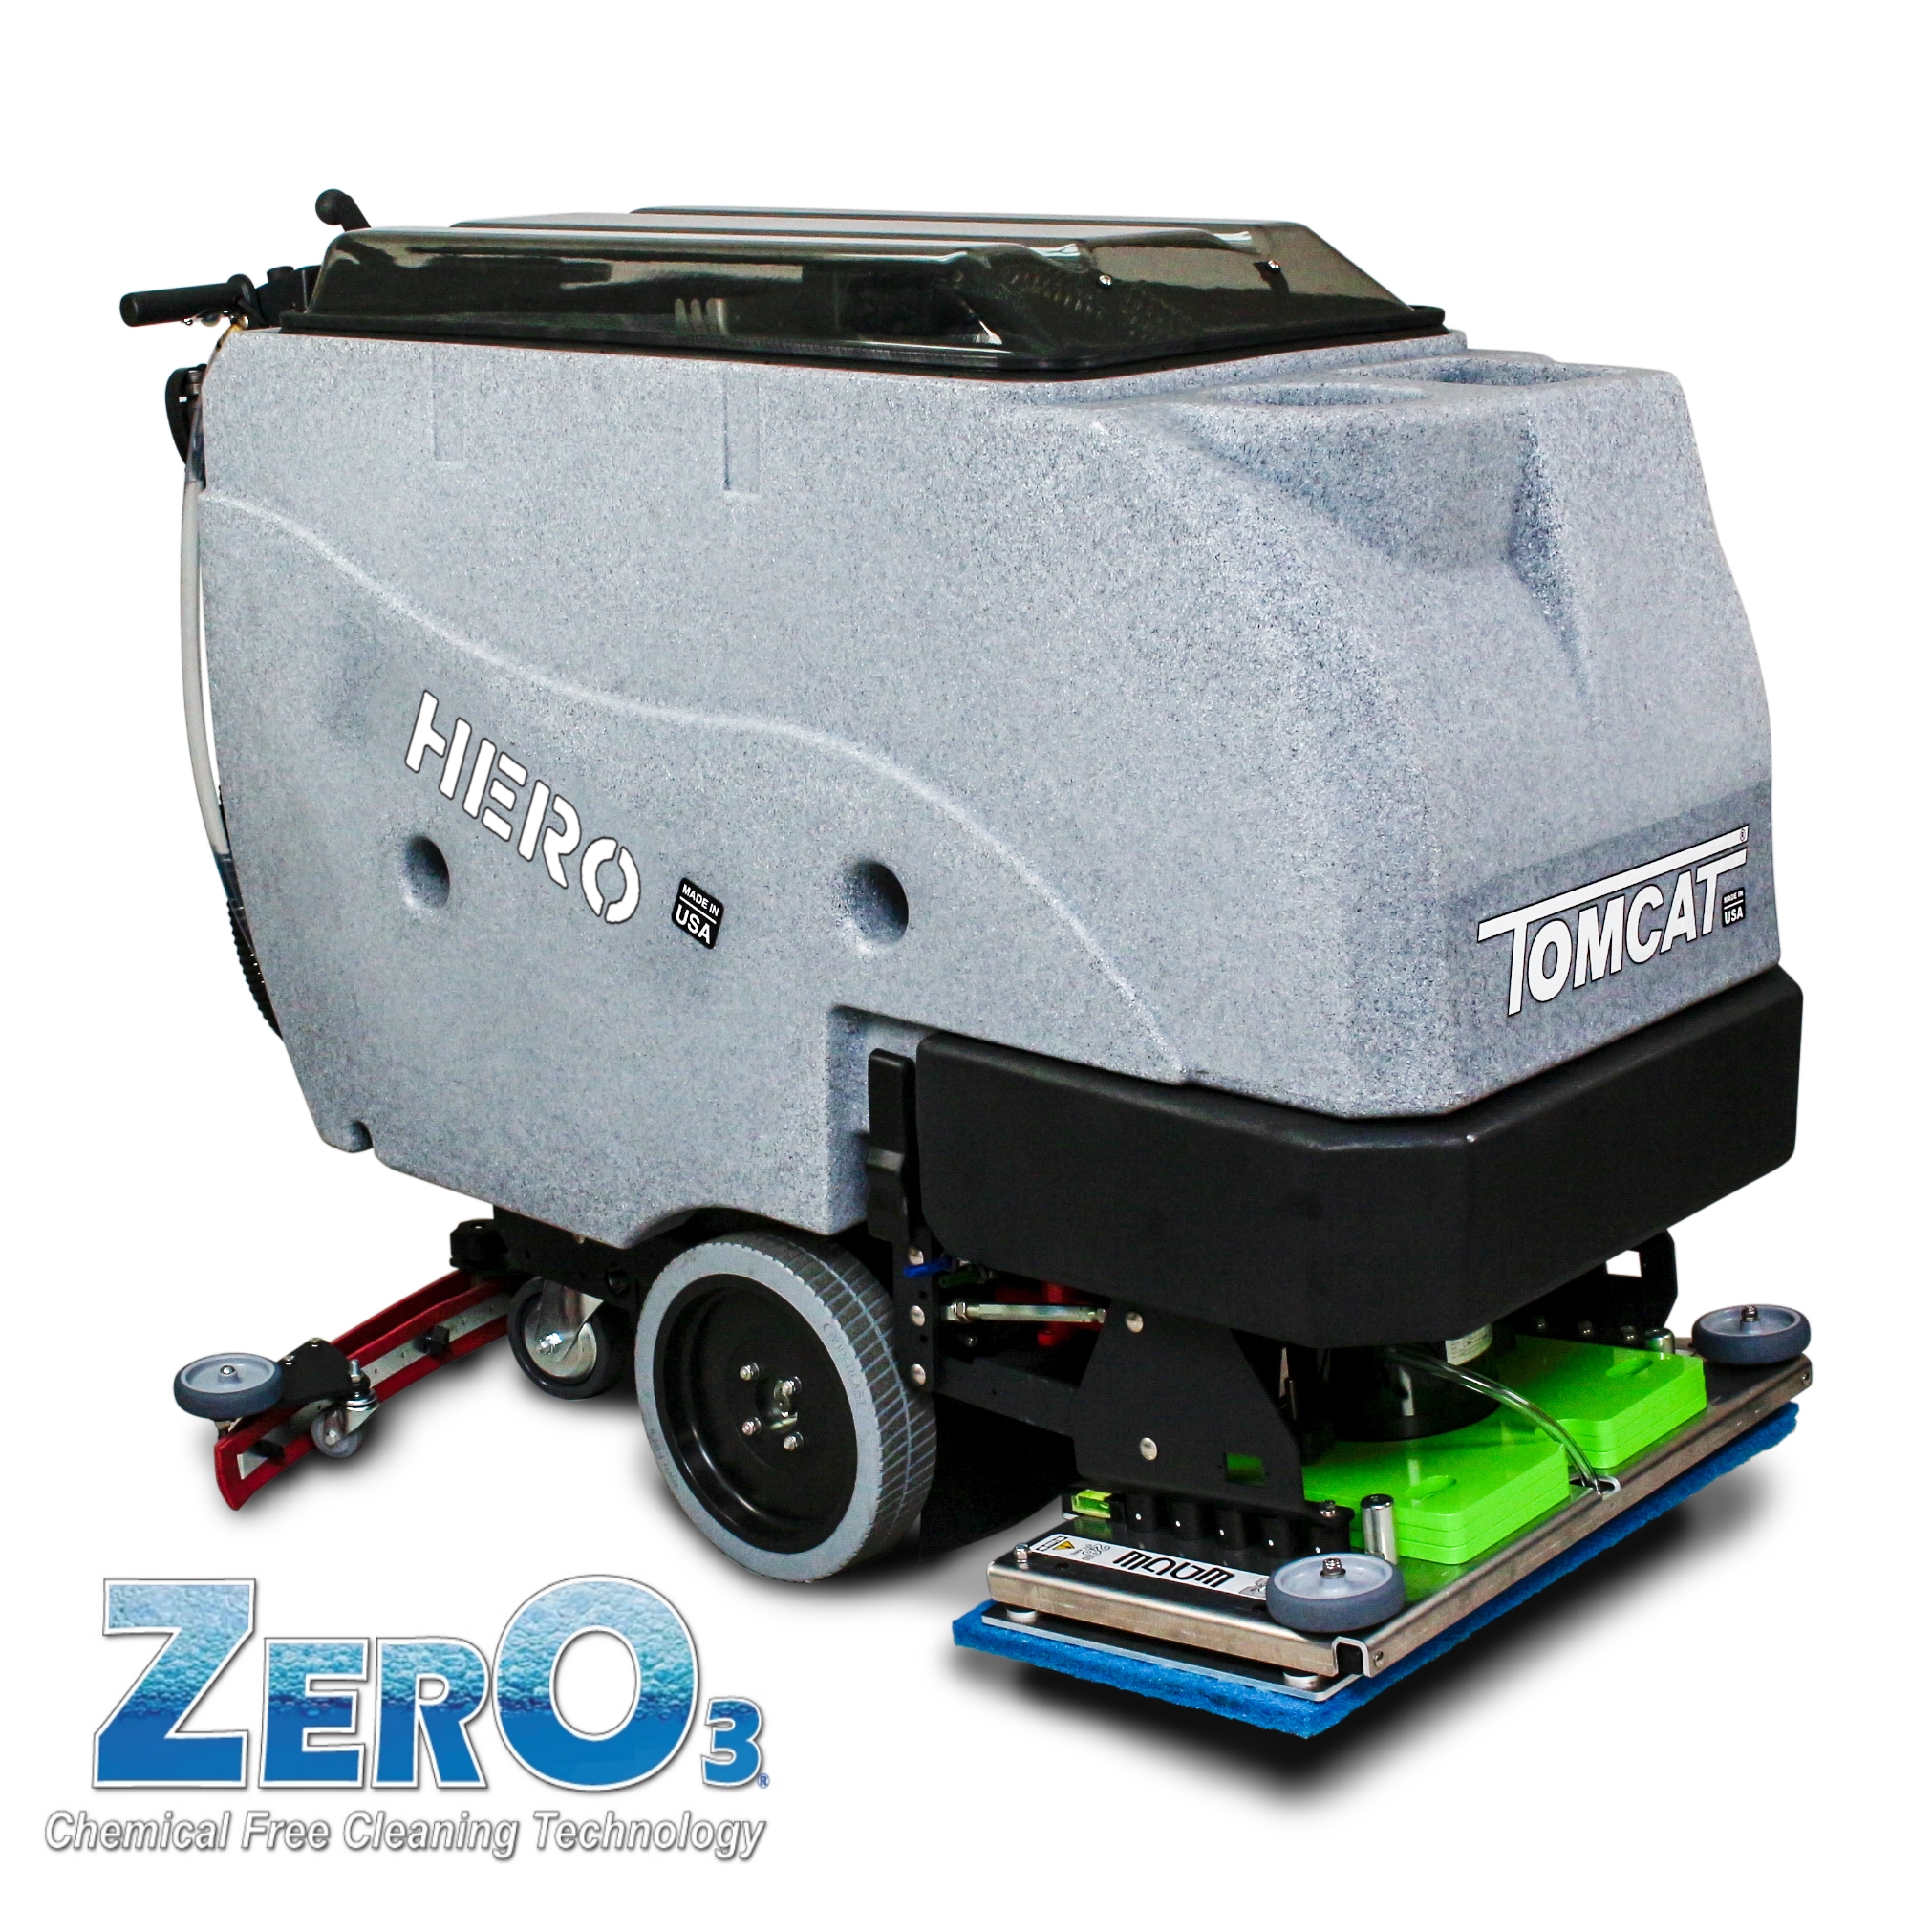 Carbon EDGE Scrubber Drier from TomCat